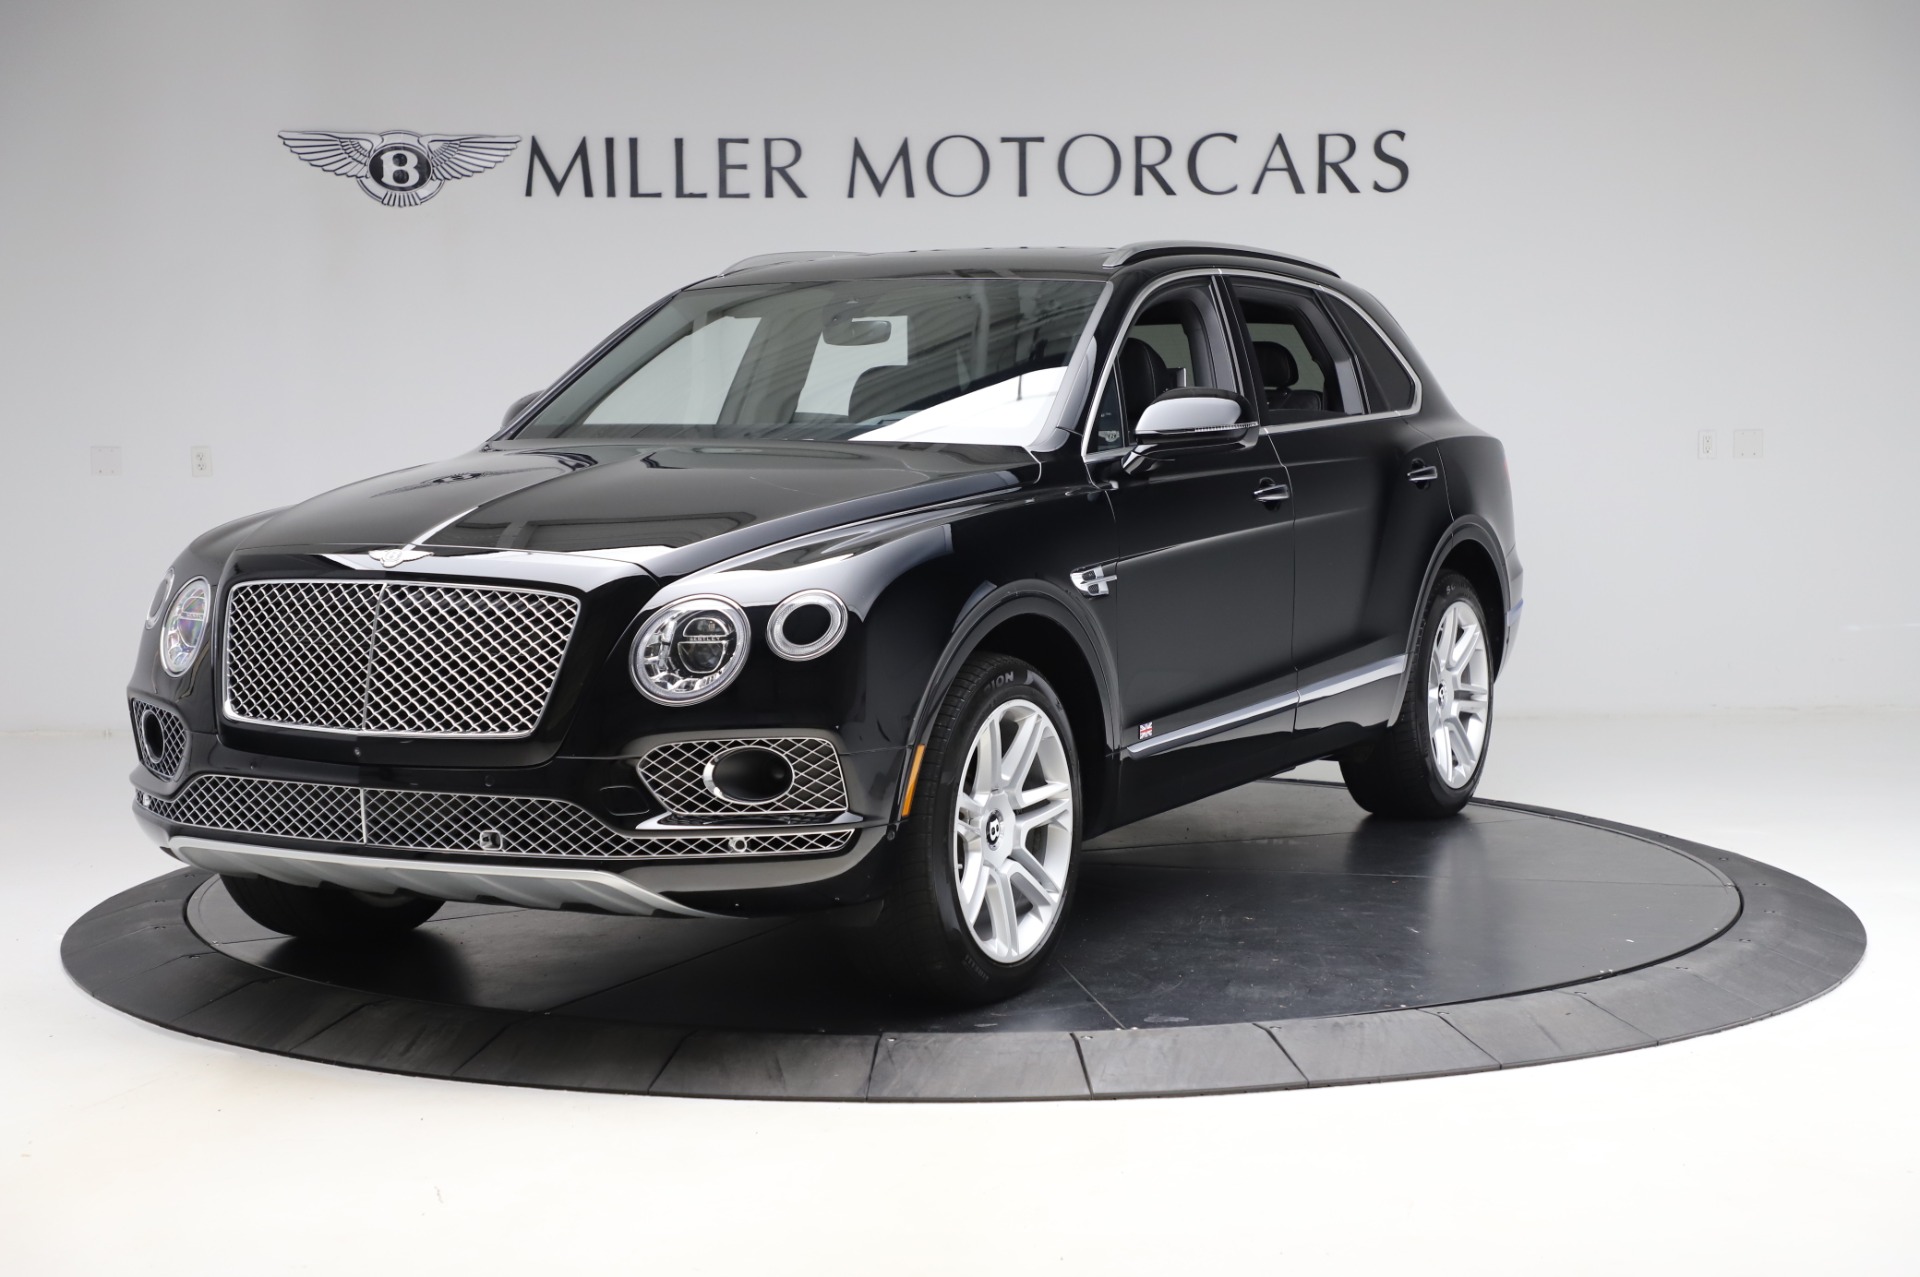 Used 2018 Bentley Bentayga Activity Edition for sale Sold at Bugatti of Greenwich in Greenwich CT 06830 1